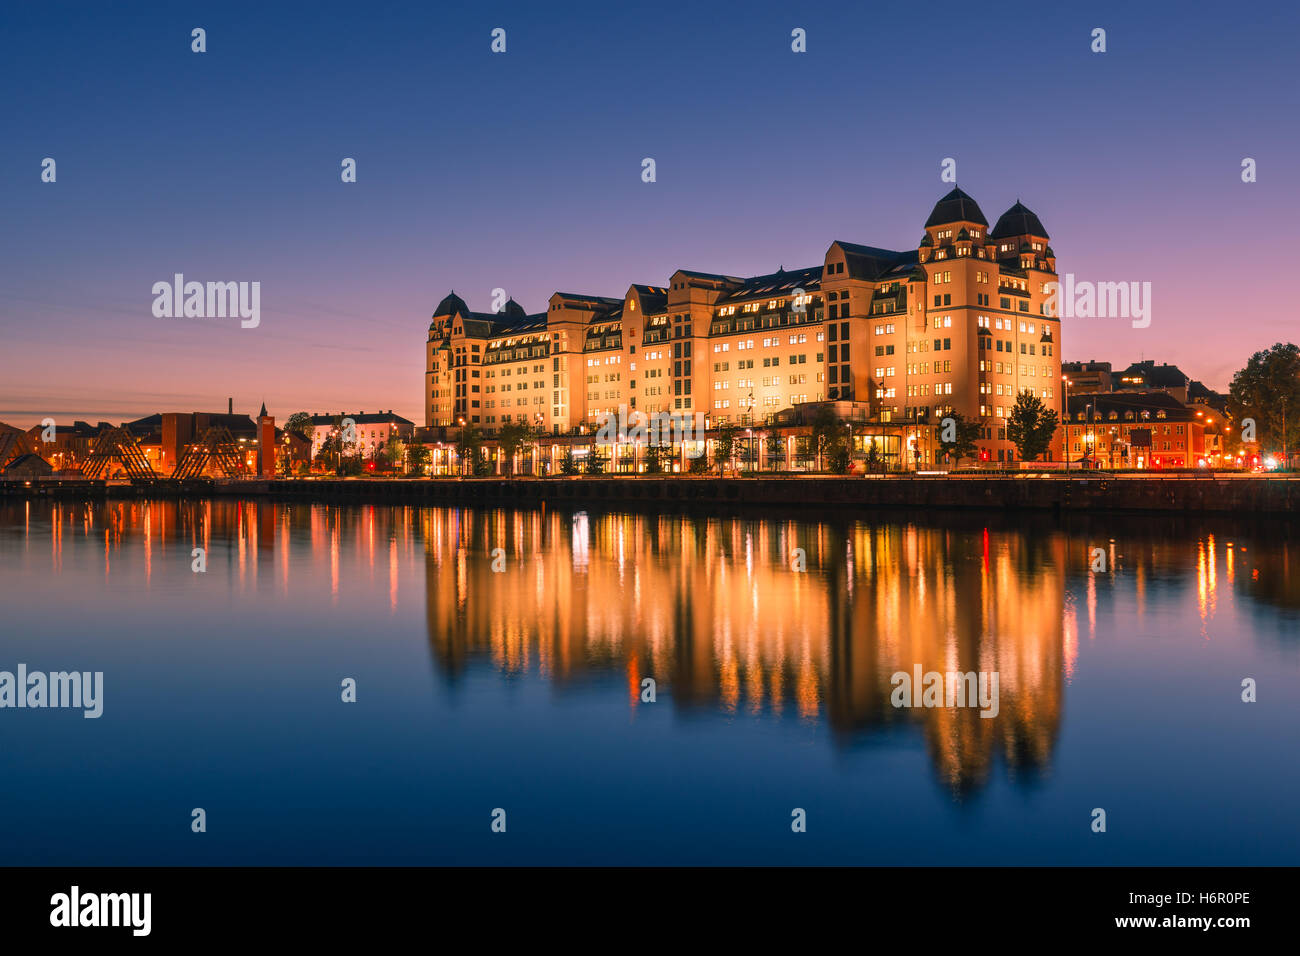 Blue hour in Oslo with the Eniro Norge building, Norway. Stock Photo